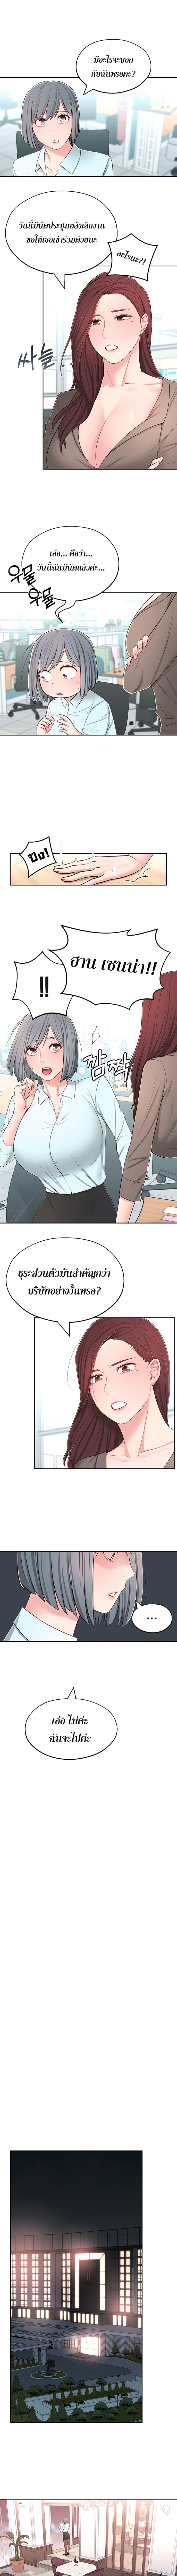 A Knowing Sister 8 ภาพ 9